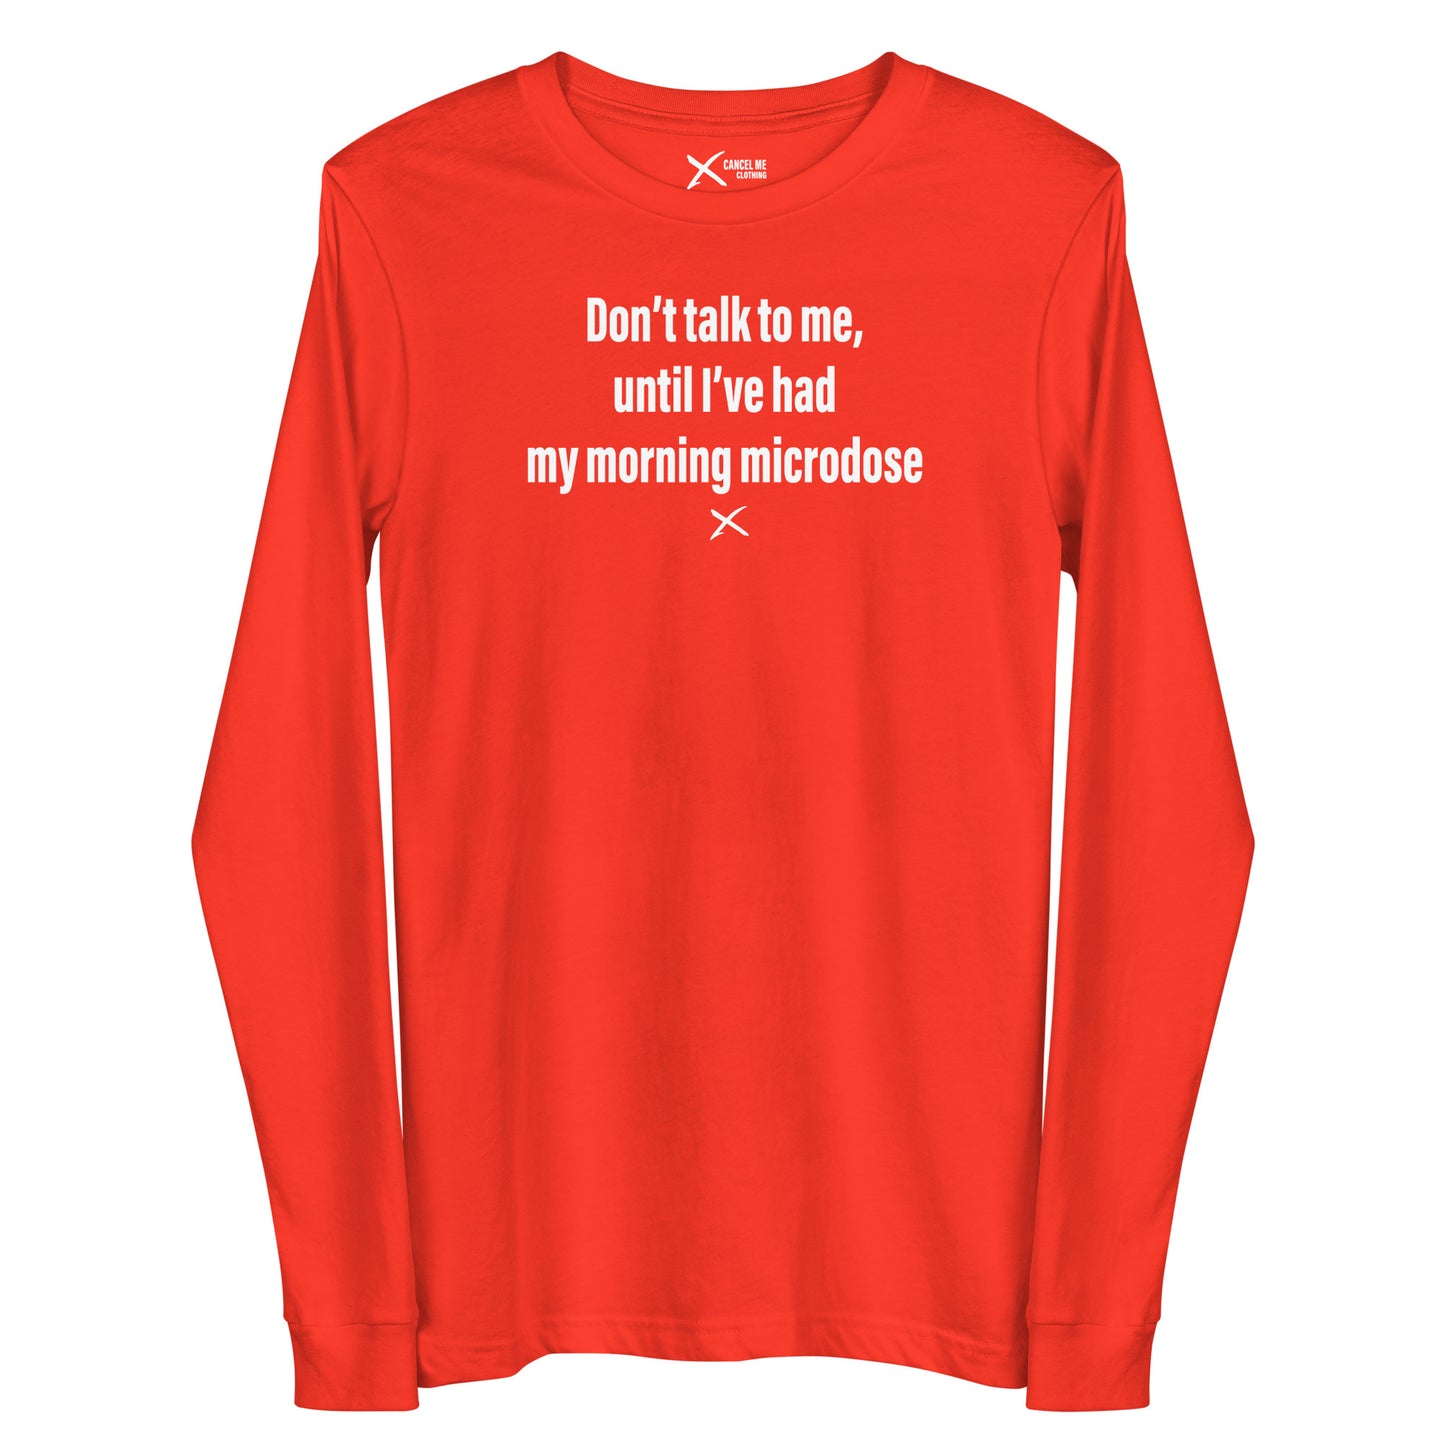 Don't talk to me, until I've had my morning microdose - Longsleeve